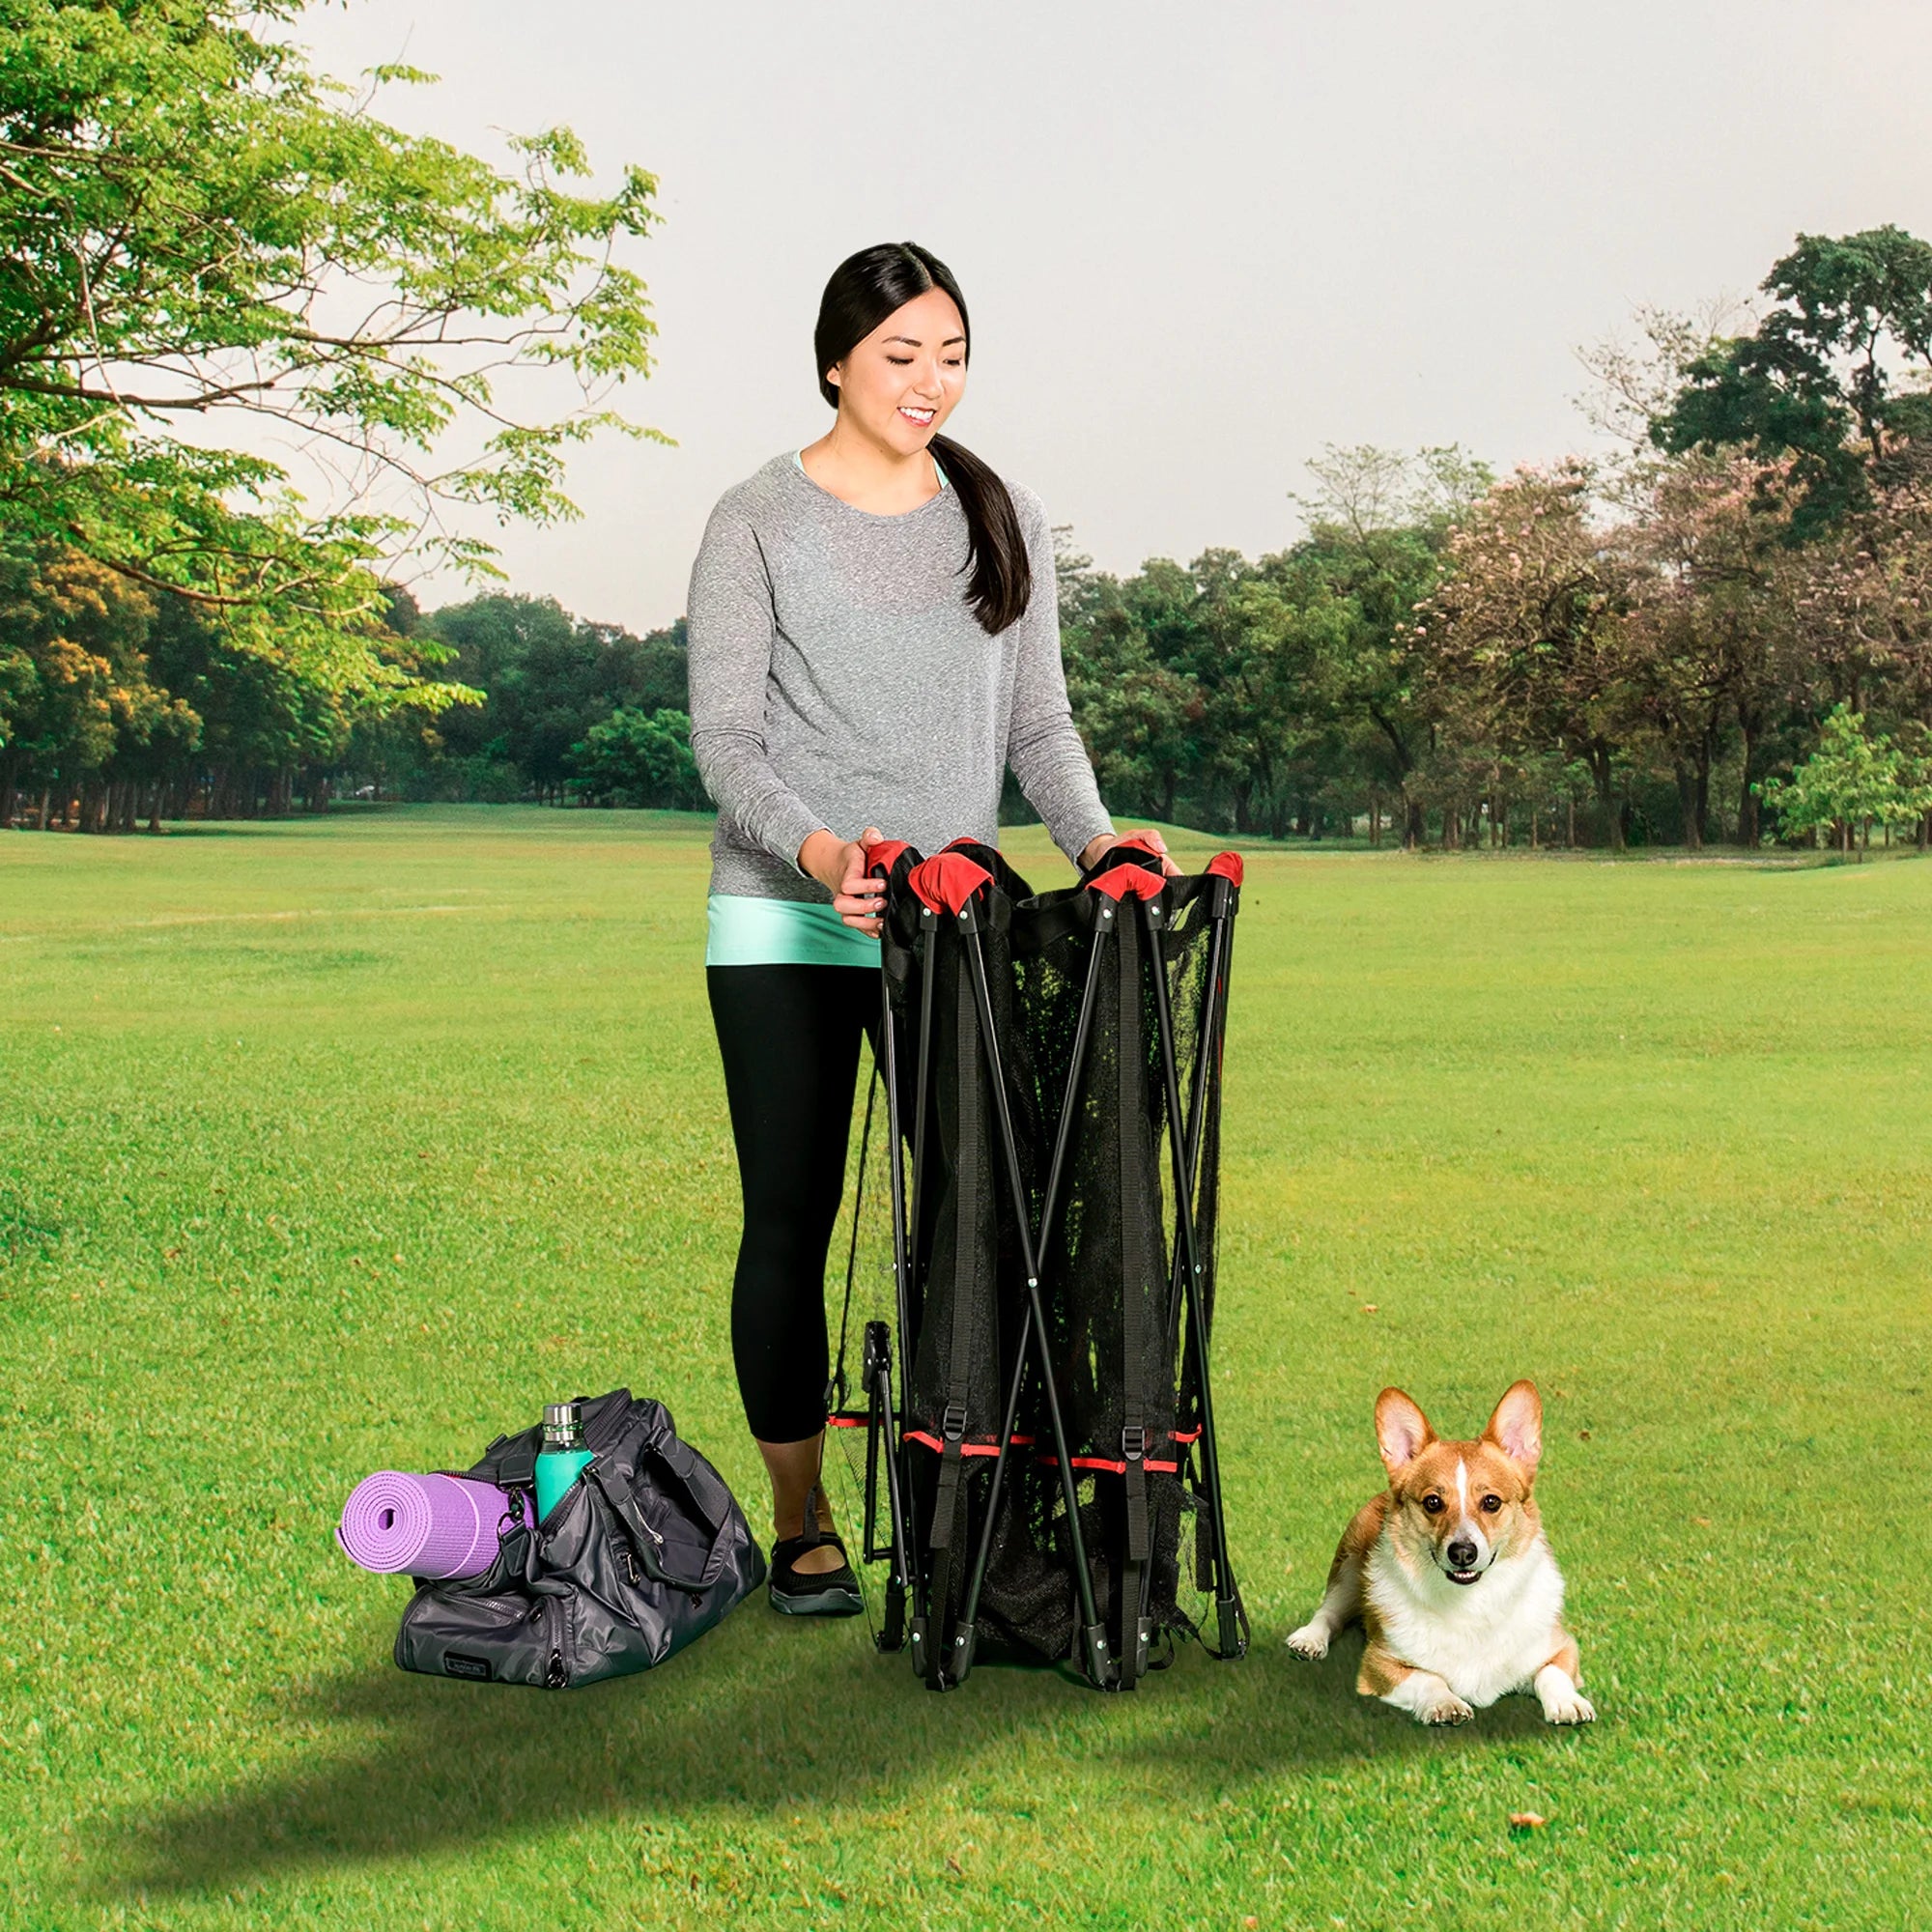 Woman looking down at dog while holding Portable Pet Pen at park.